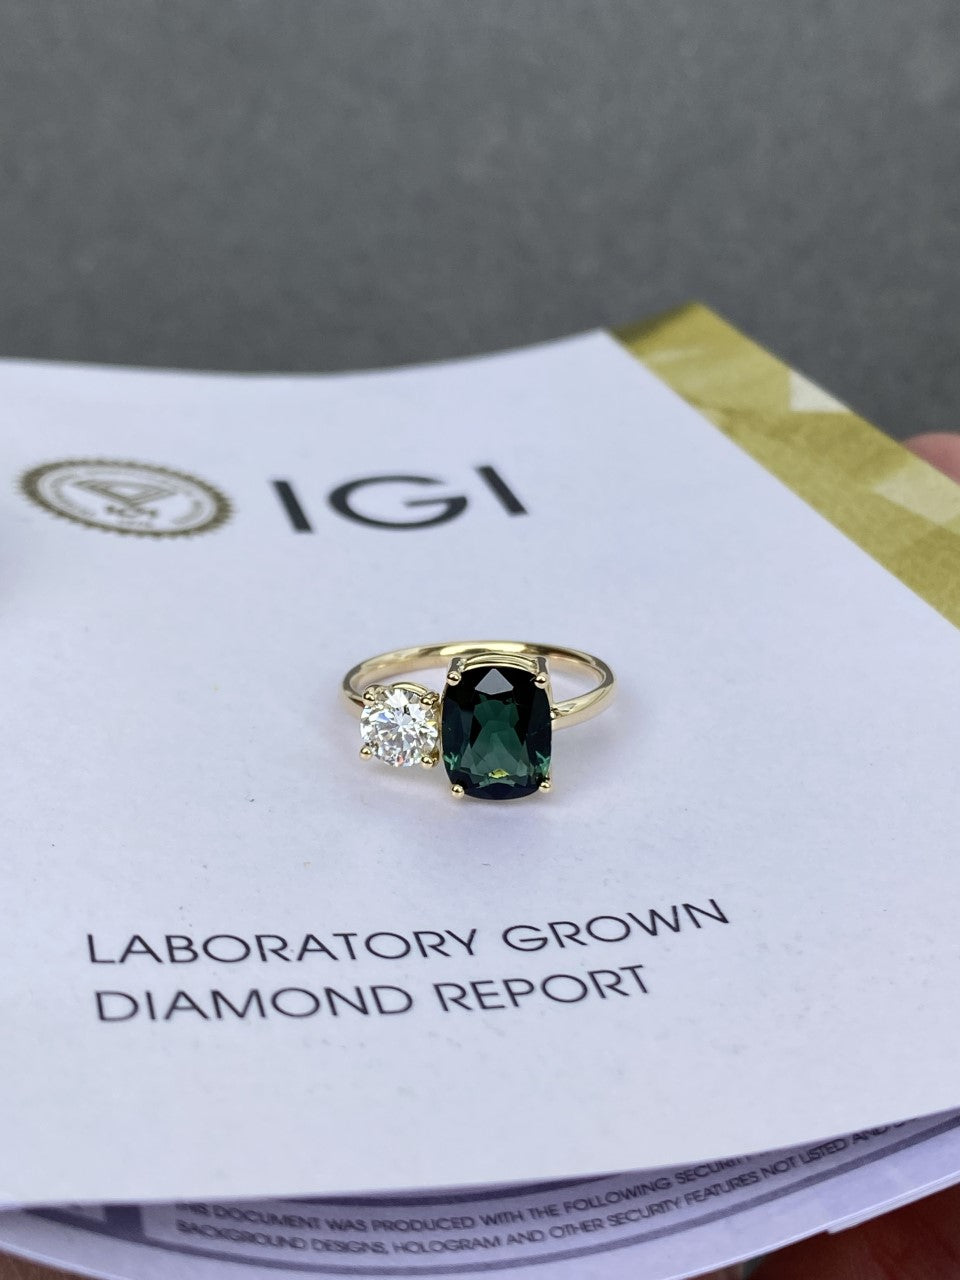 Lab-grown diamonds, what makes them the new It Girl?